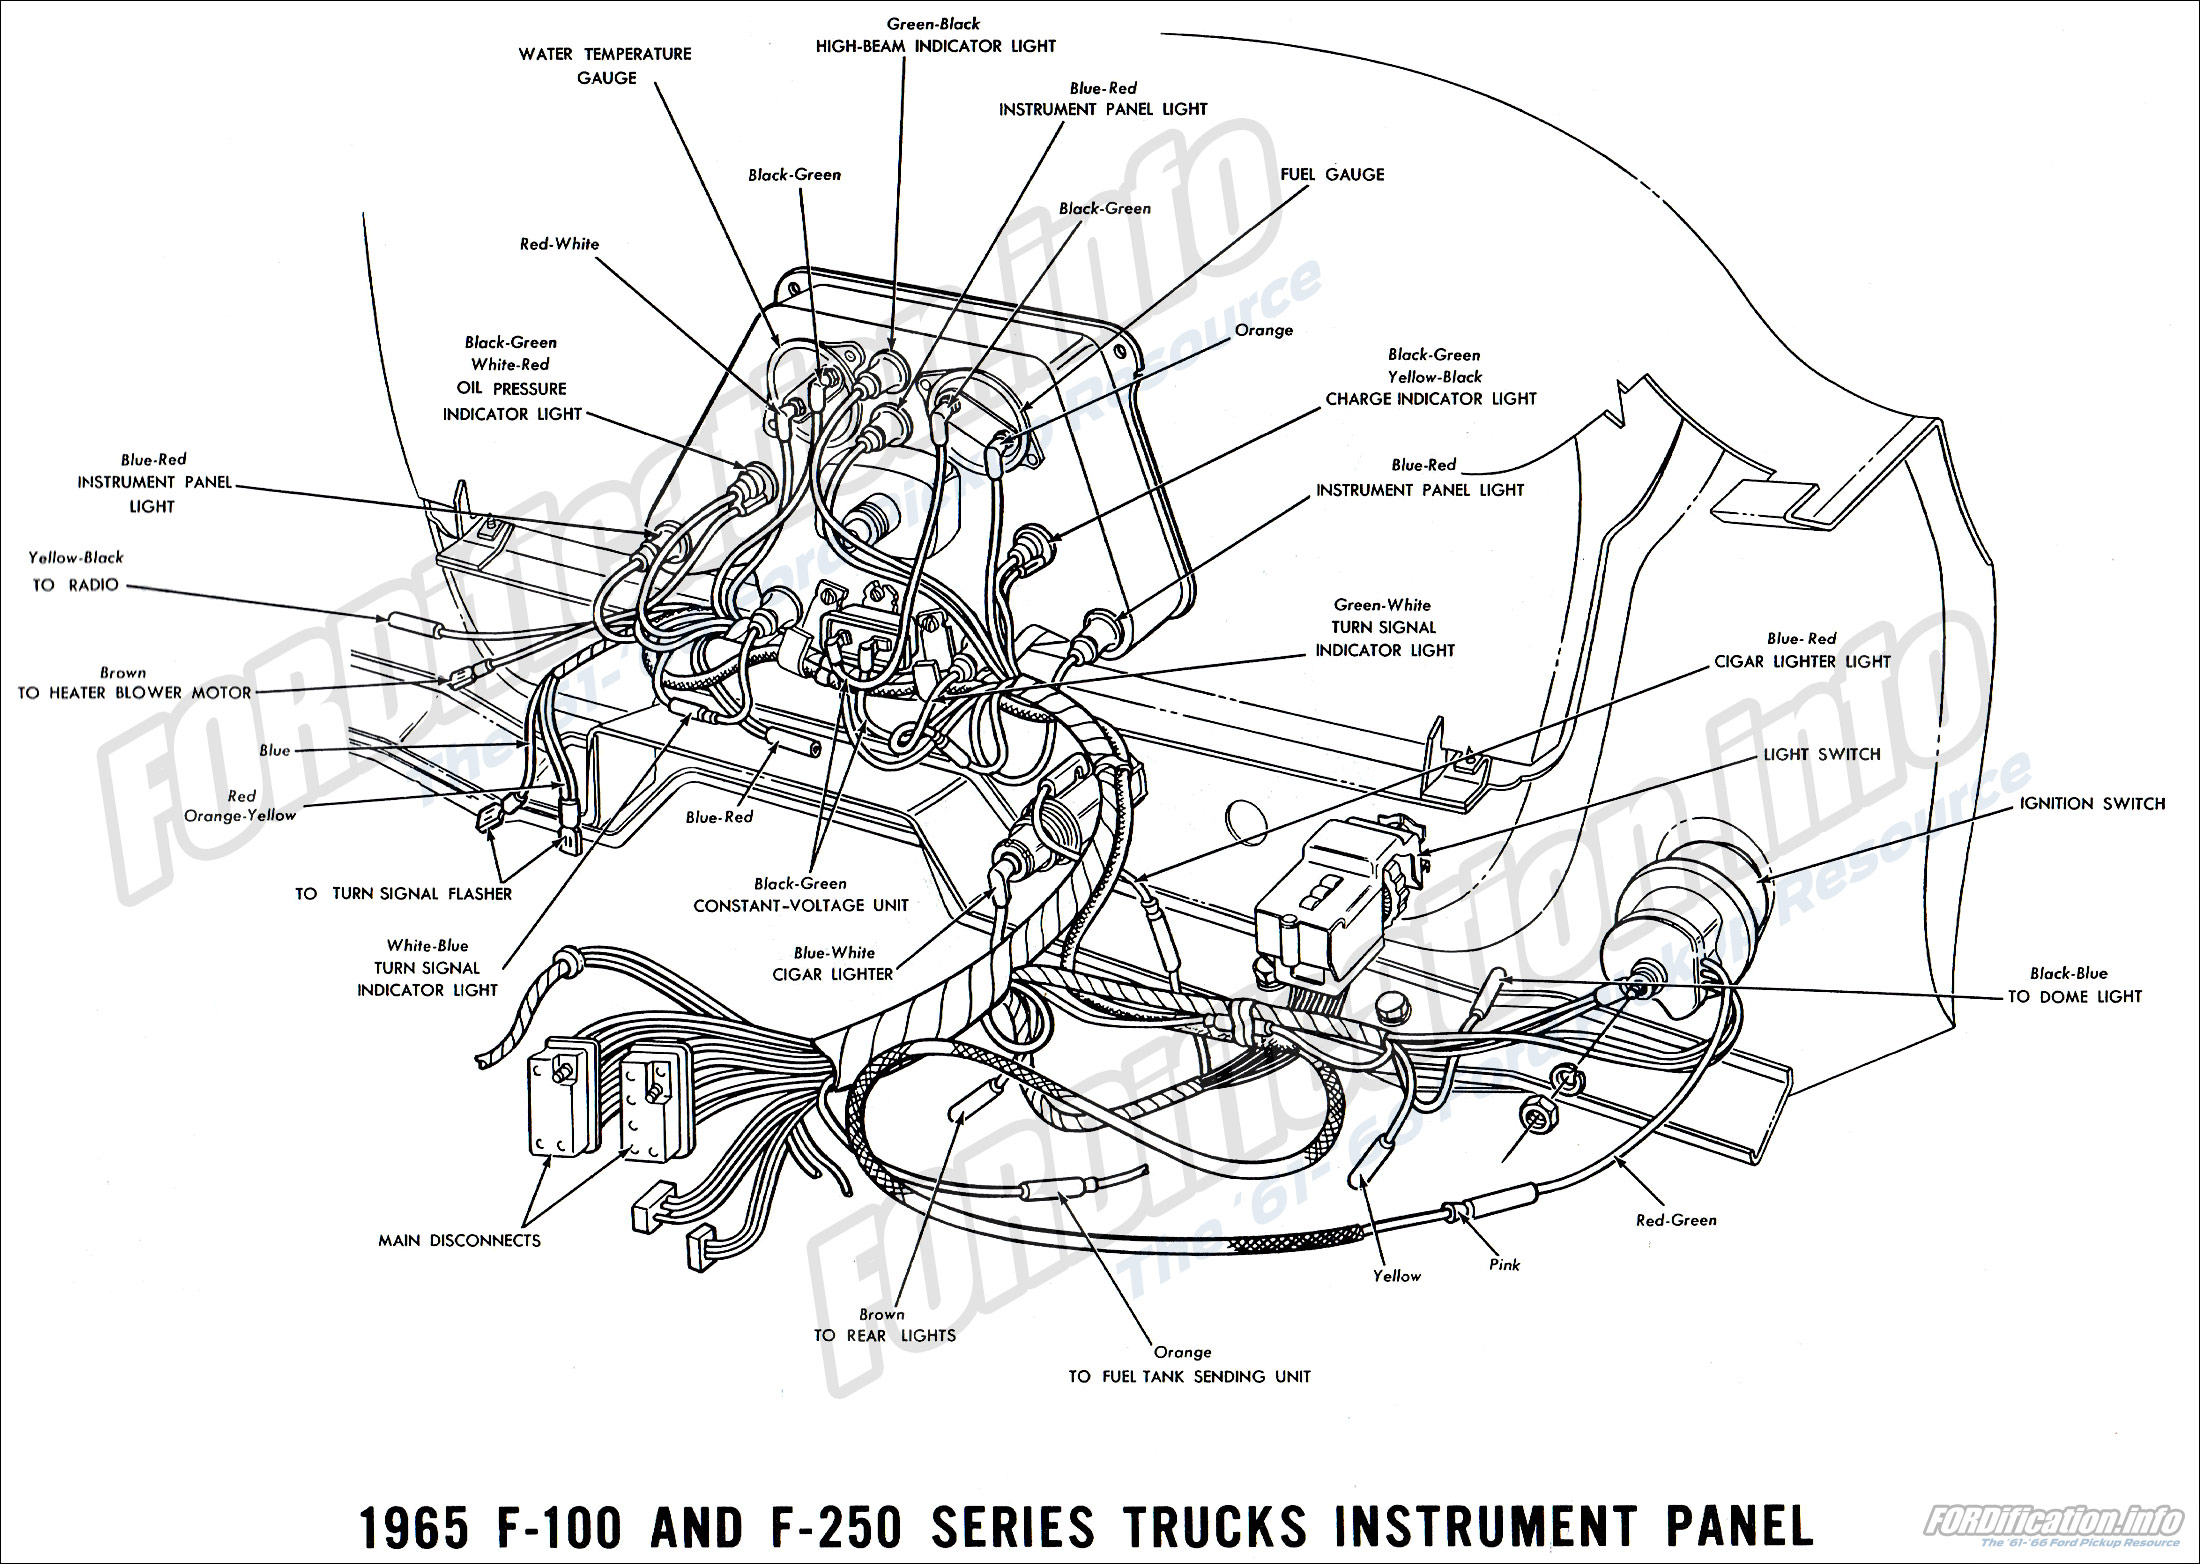 1965 Ford Truck Wiring Diagrams - Fordification Info